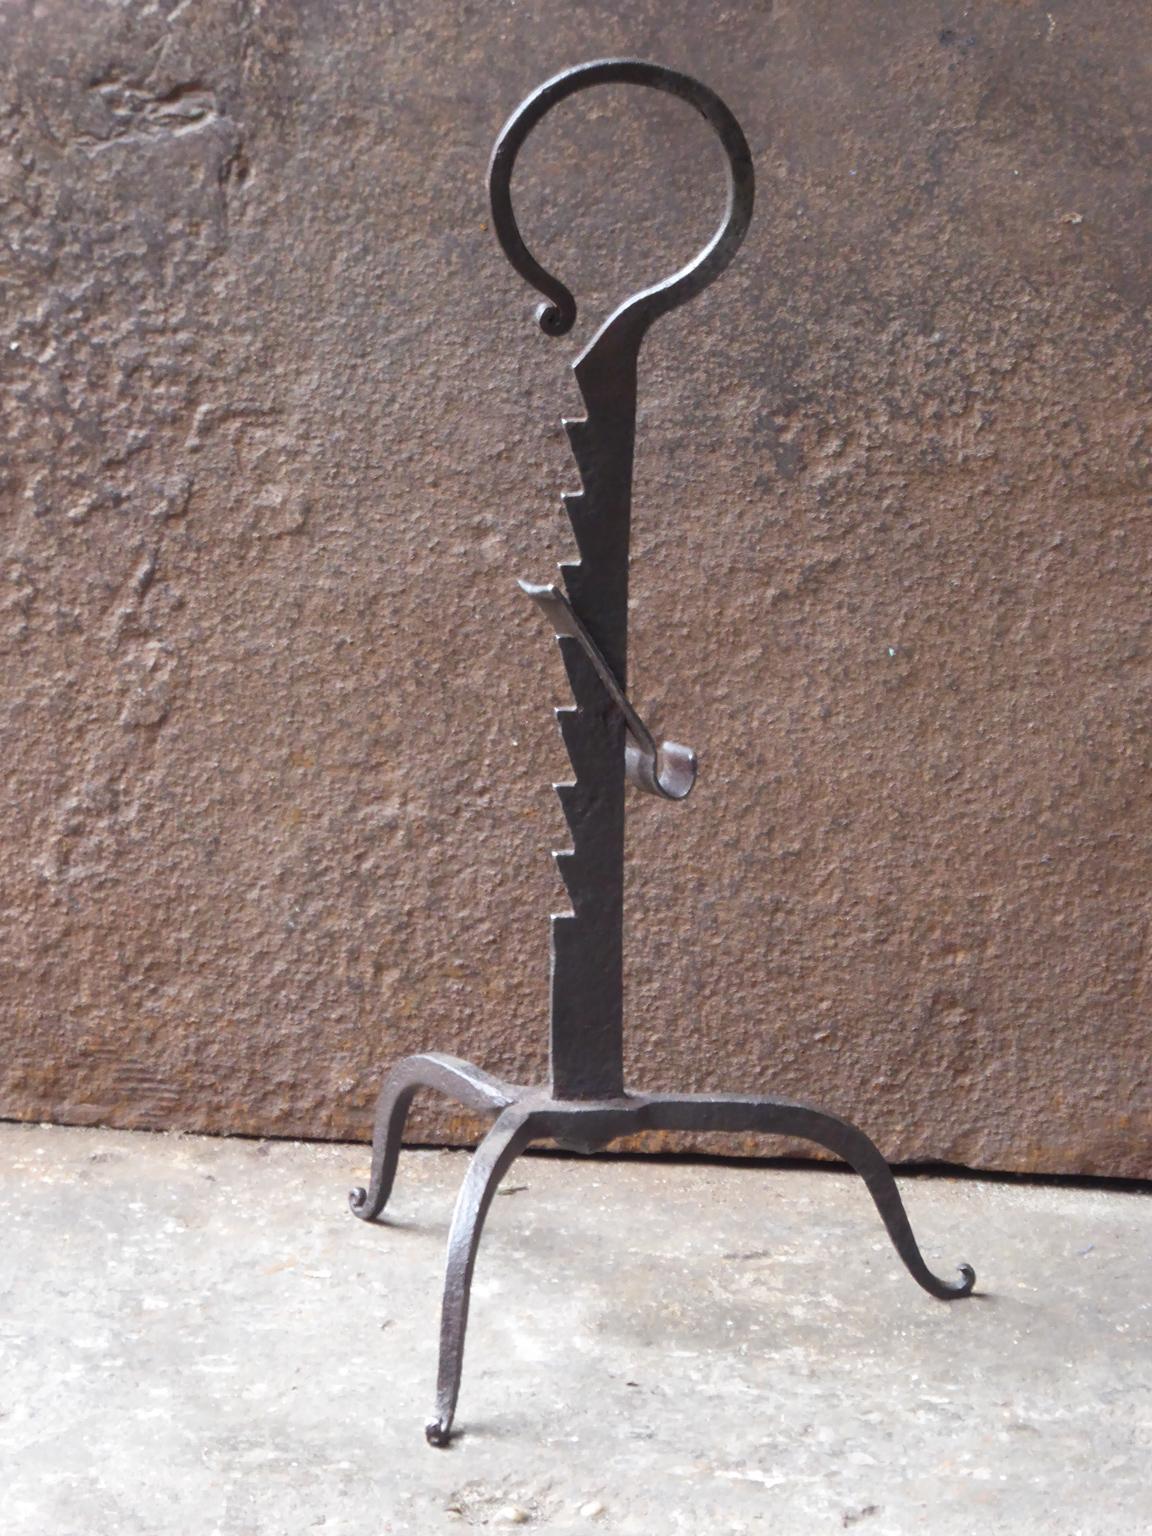 19th century French Napoleon III period stand for a roasting jack. The stand is hand forged and made of wrought iron. The condition is good.







